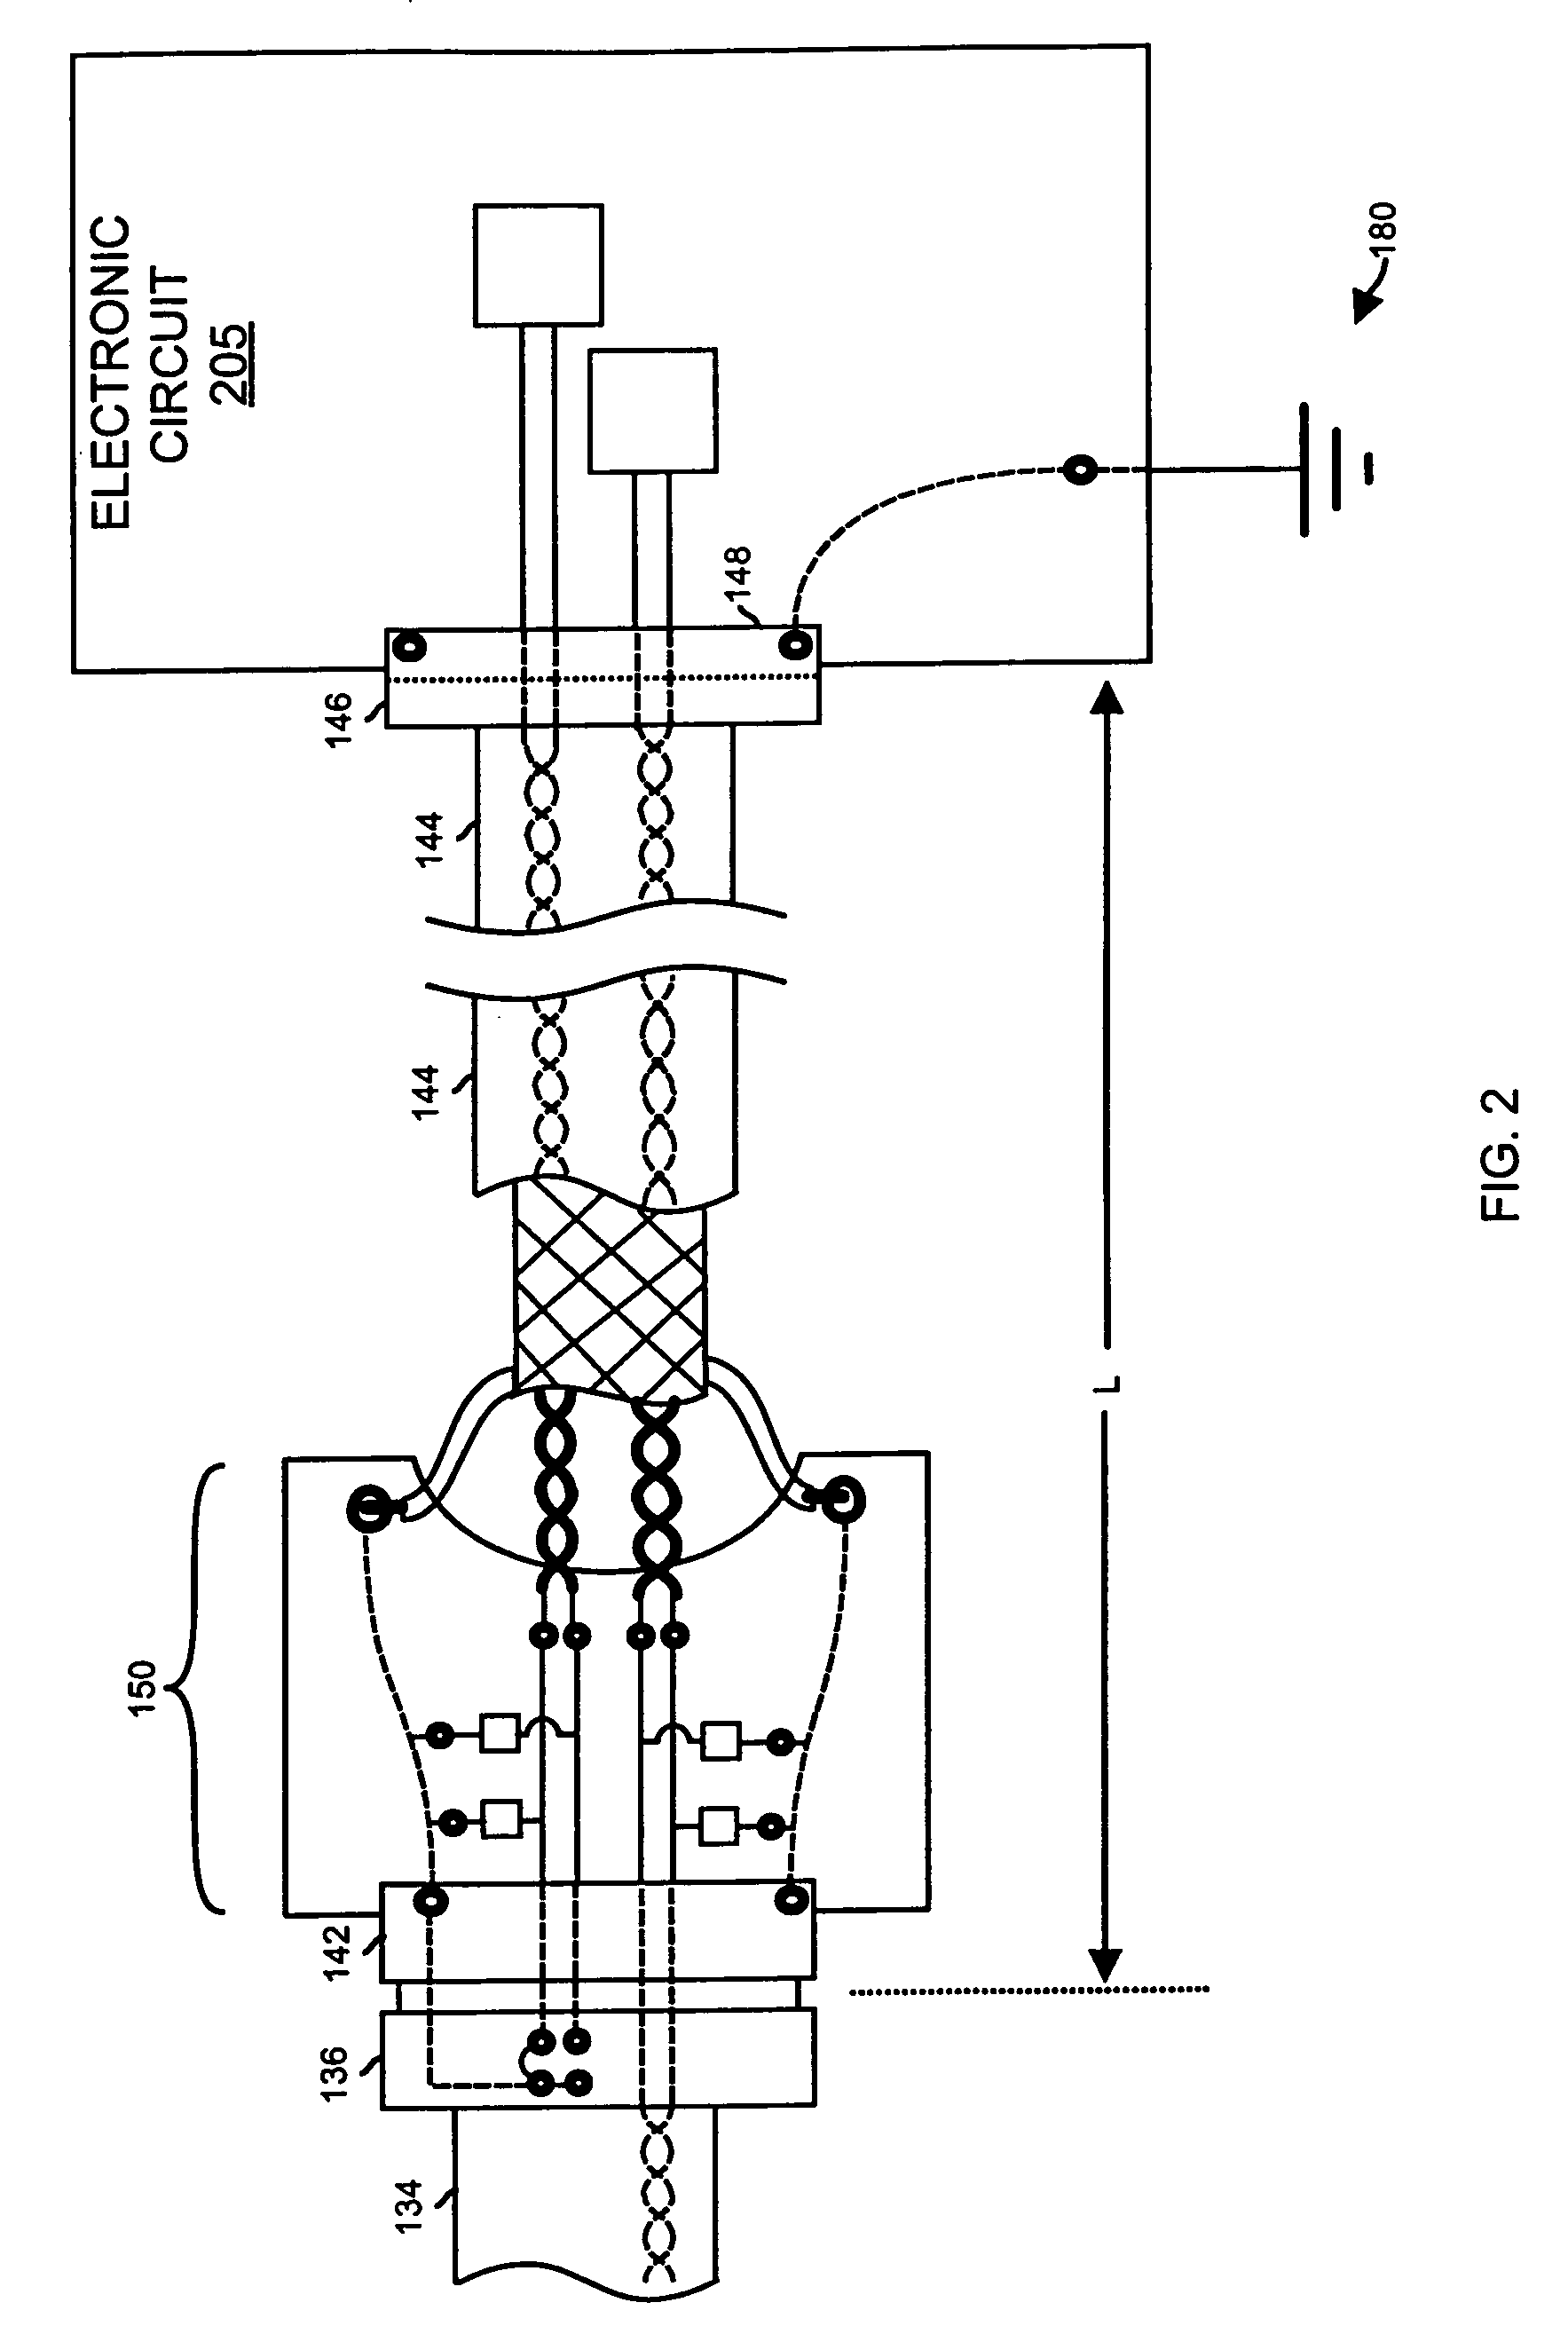 Methods and apparatus to protect against voltage surges